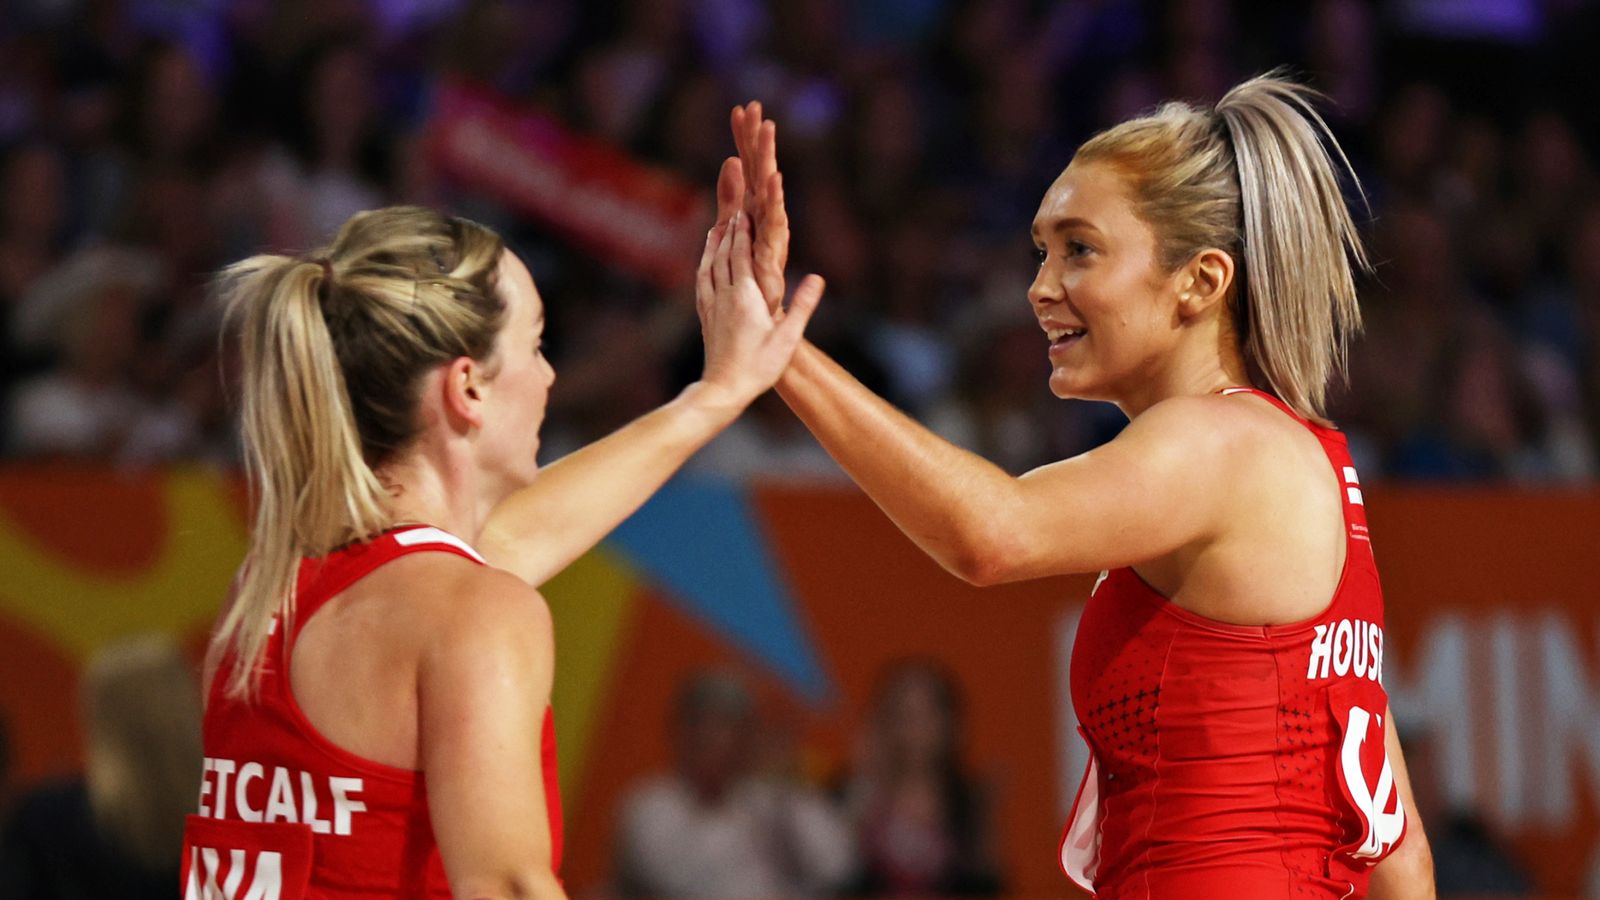 Commonwealth Games: England beat New Zealand to top Pool B, Australia await in netball semi-finals